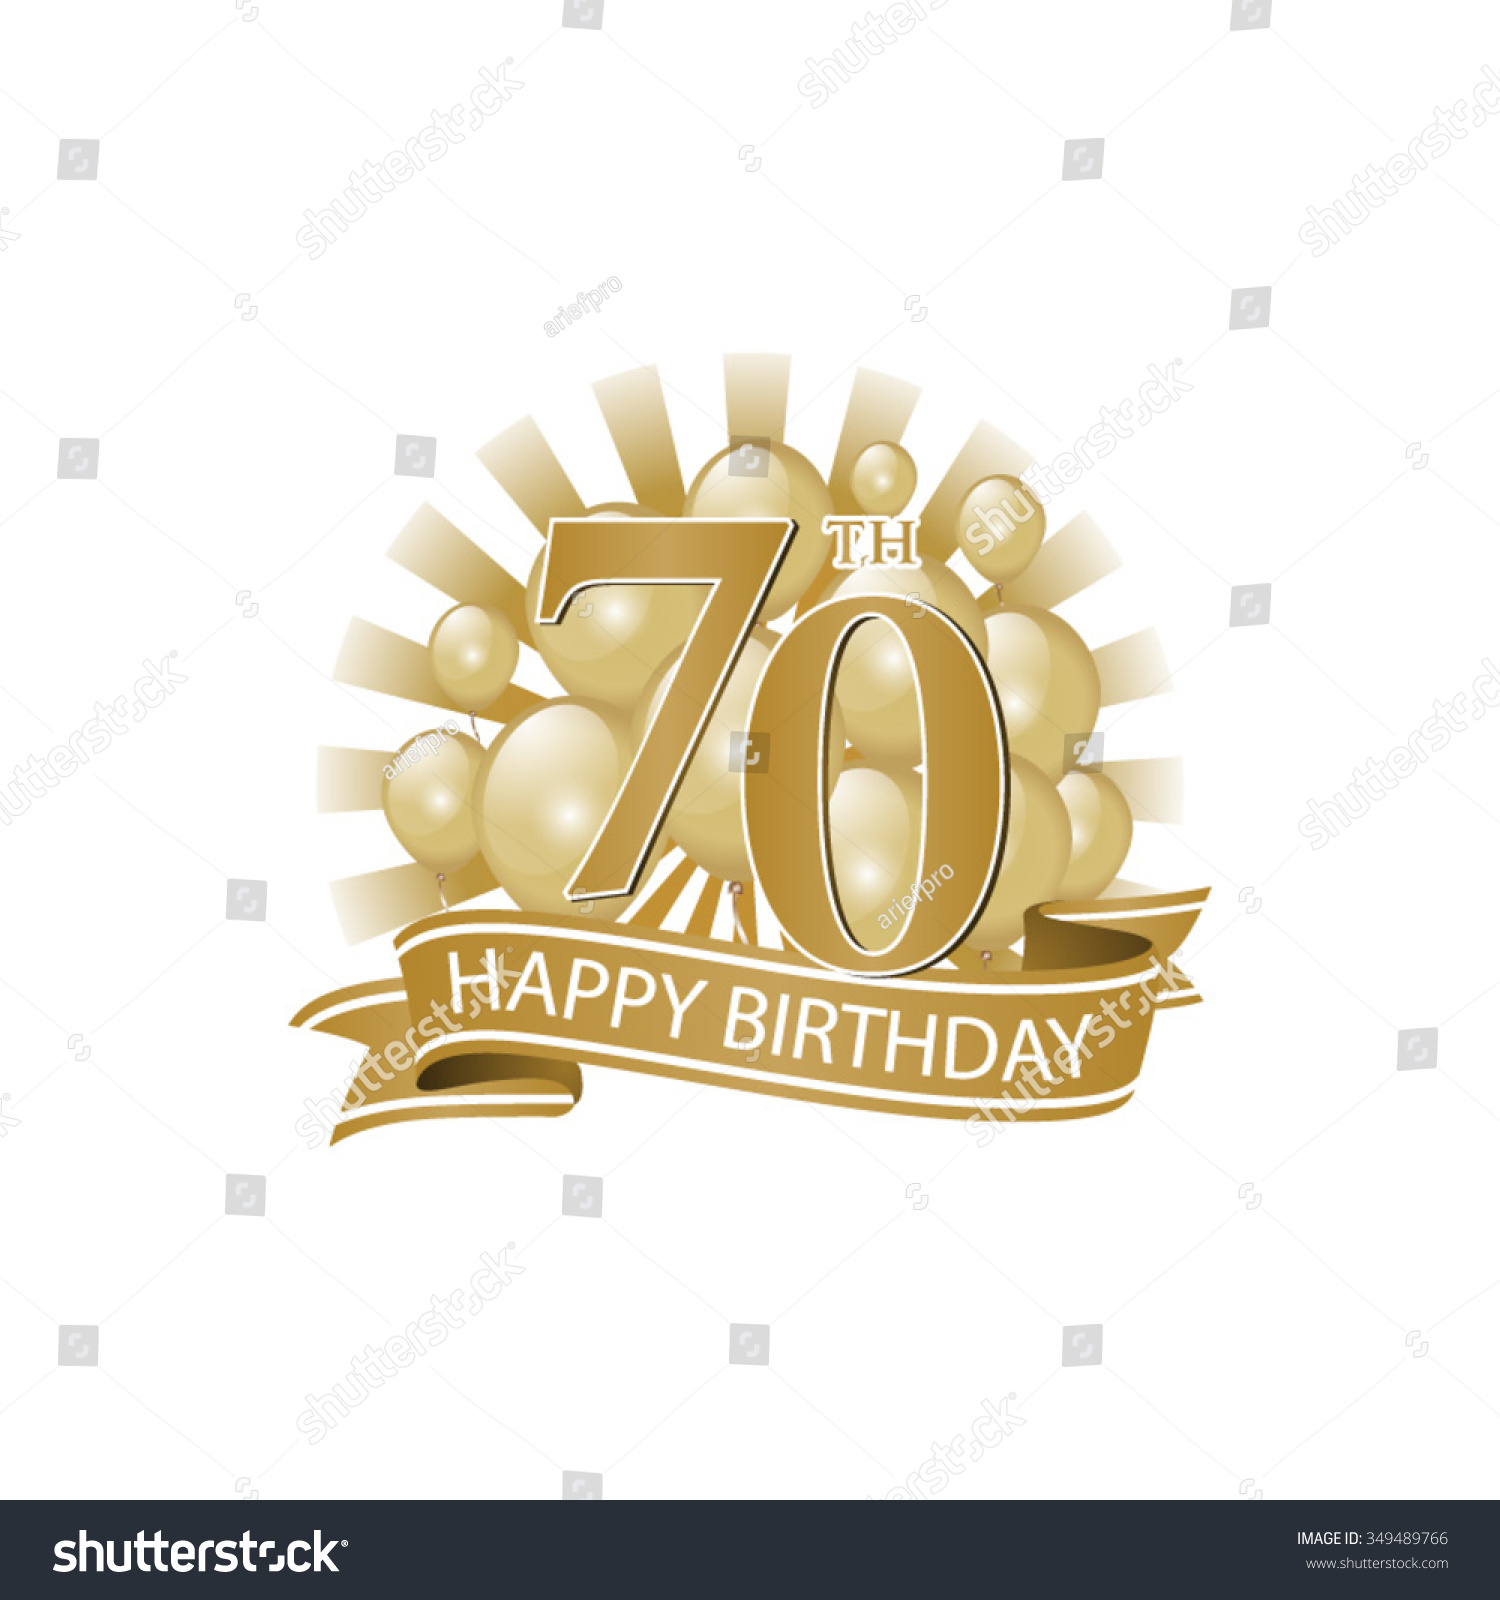 SVG of 70th golden happy birthday logo with balloons and burst of light svg